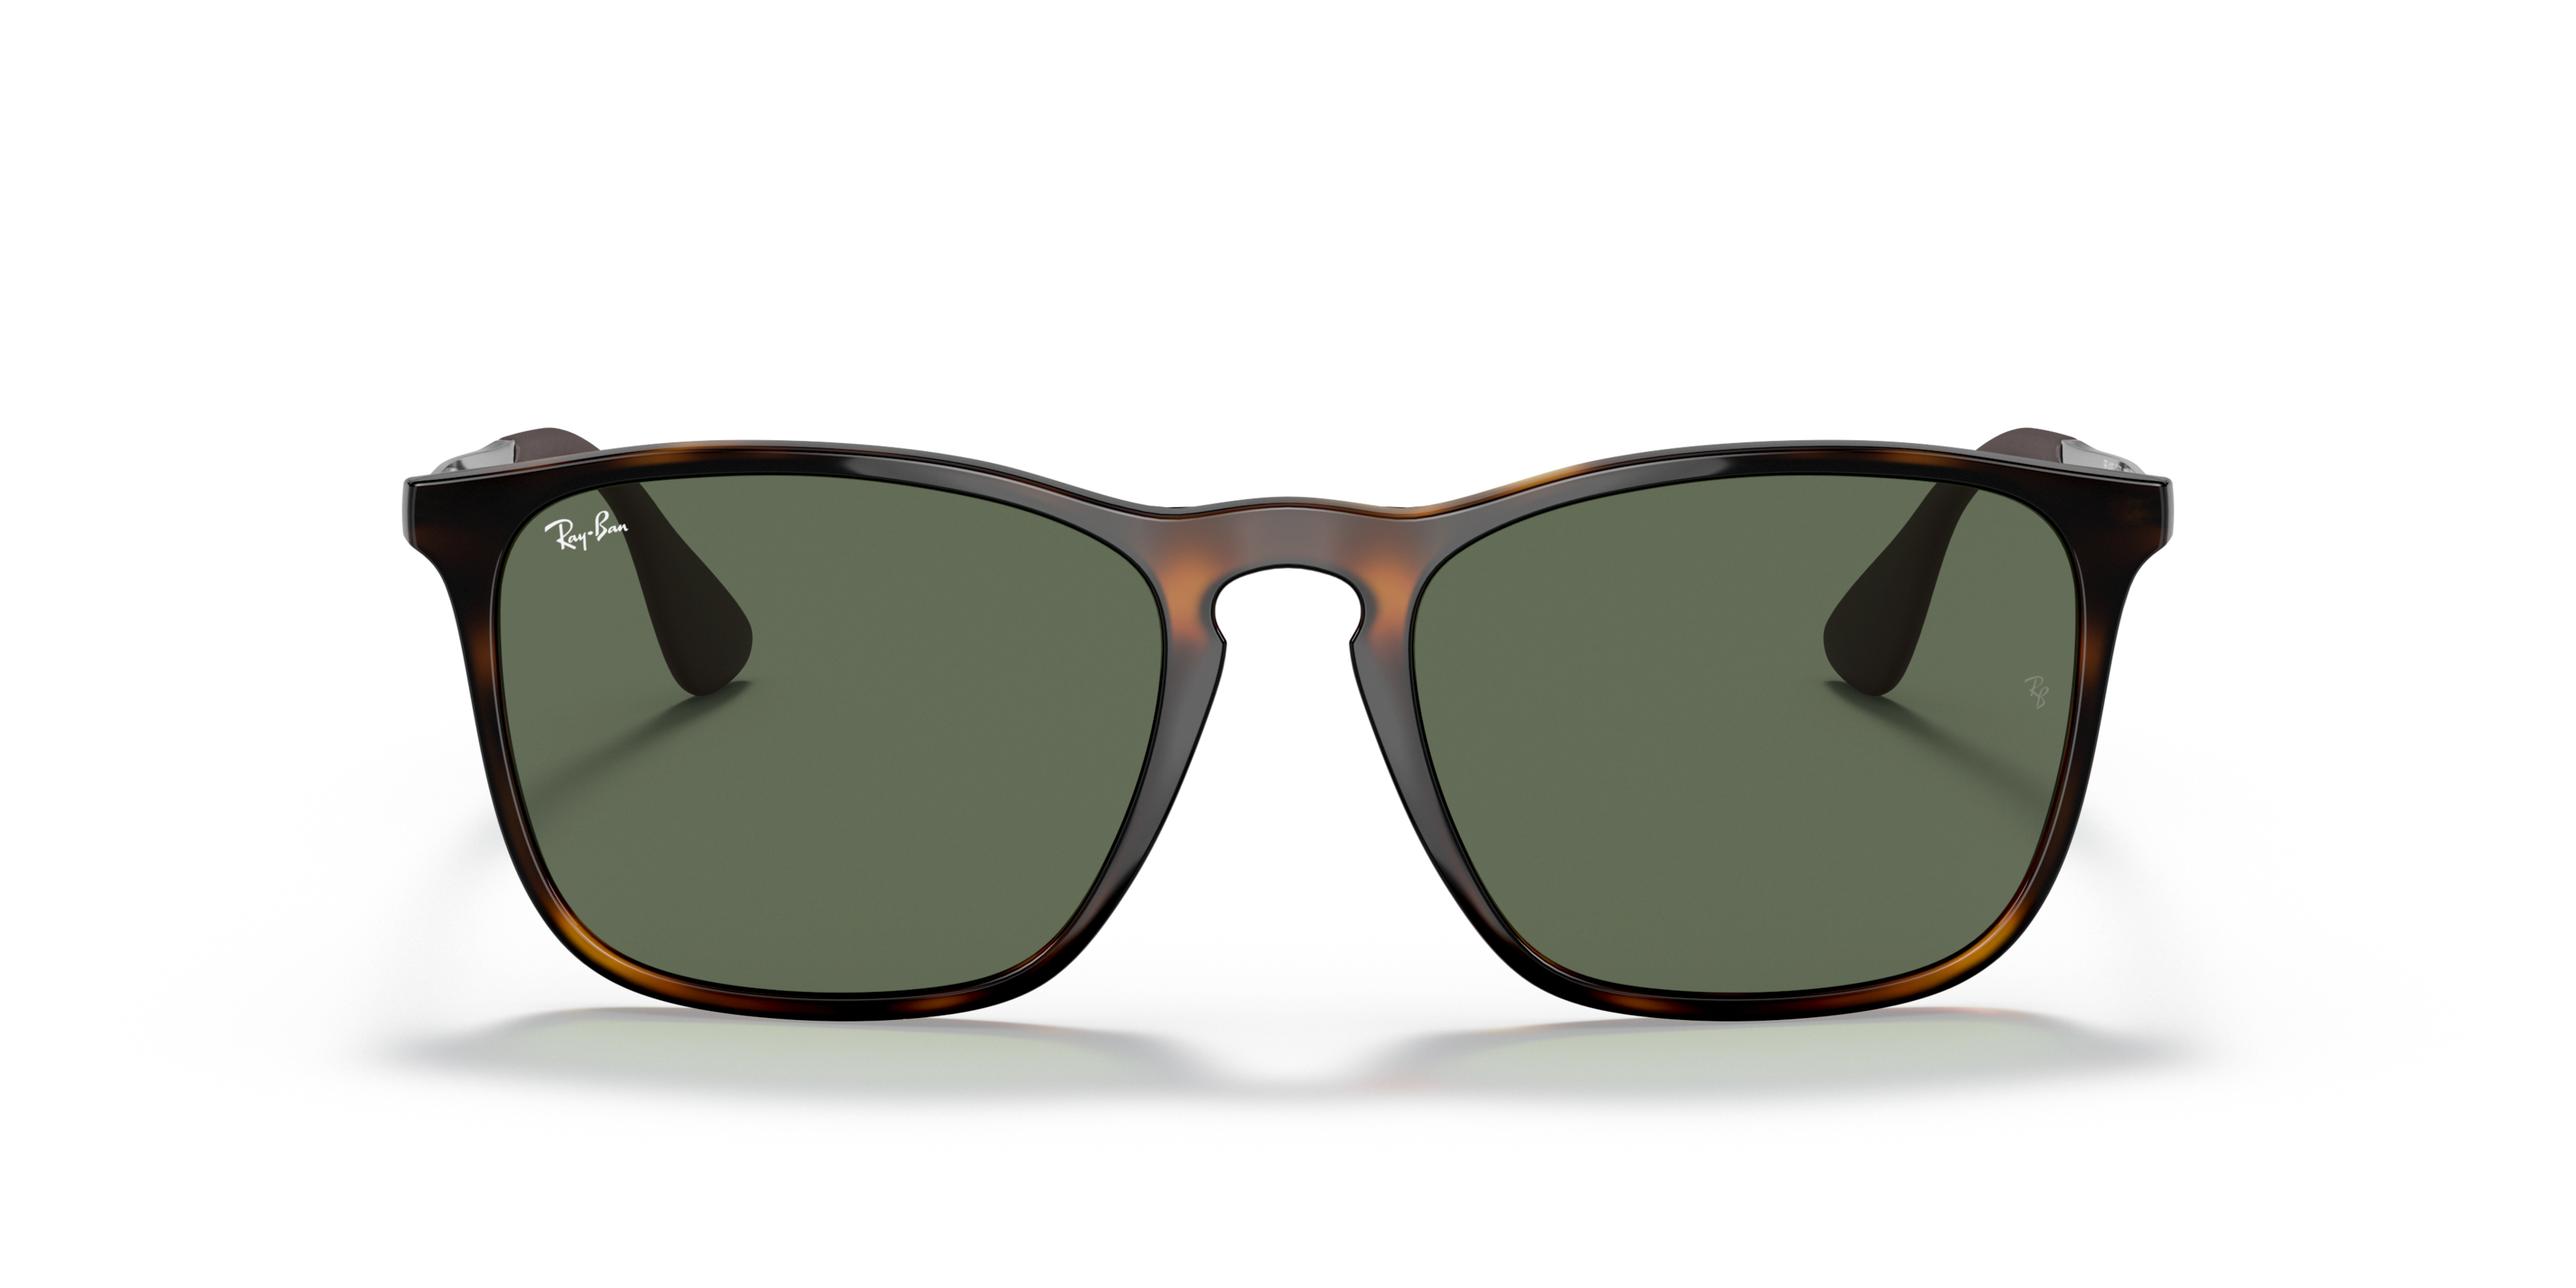 [products.image.front] Ray-Ban RB4187 710/71